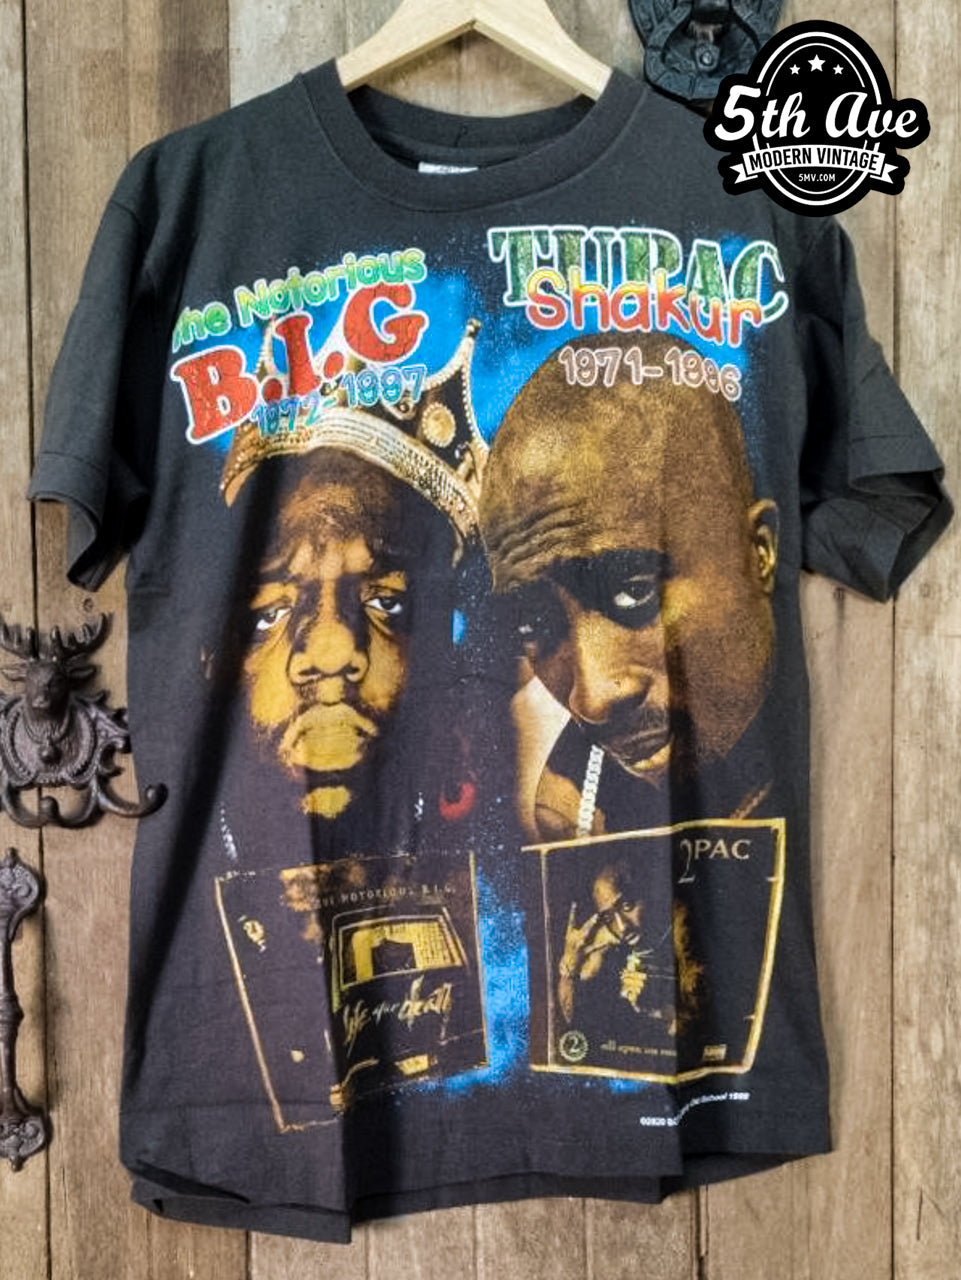 The Notorious B.I.G. and Tupac - New Vintage Band T shirt